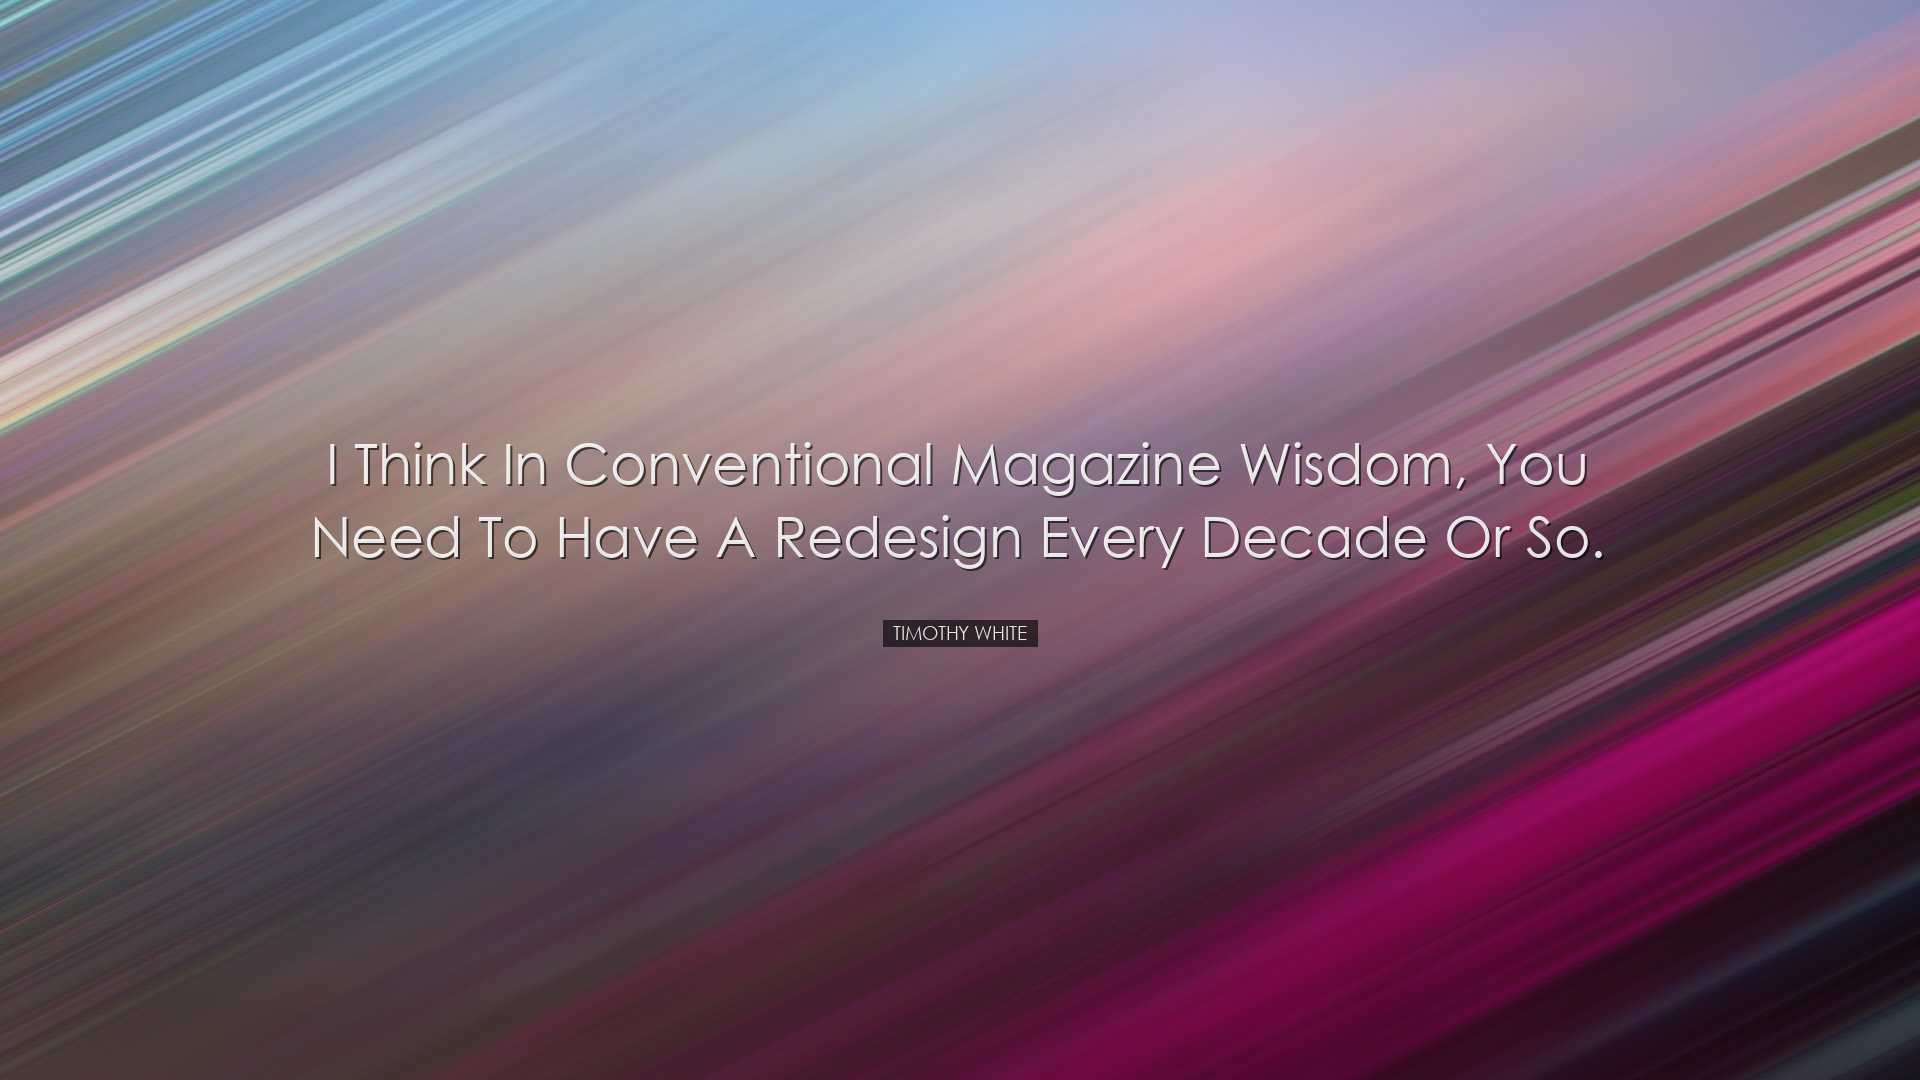 I think in conventional magazine wisdom, you need to have a redesi